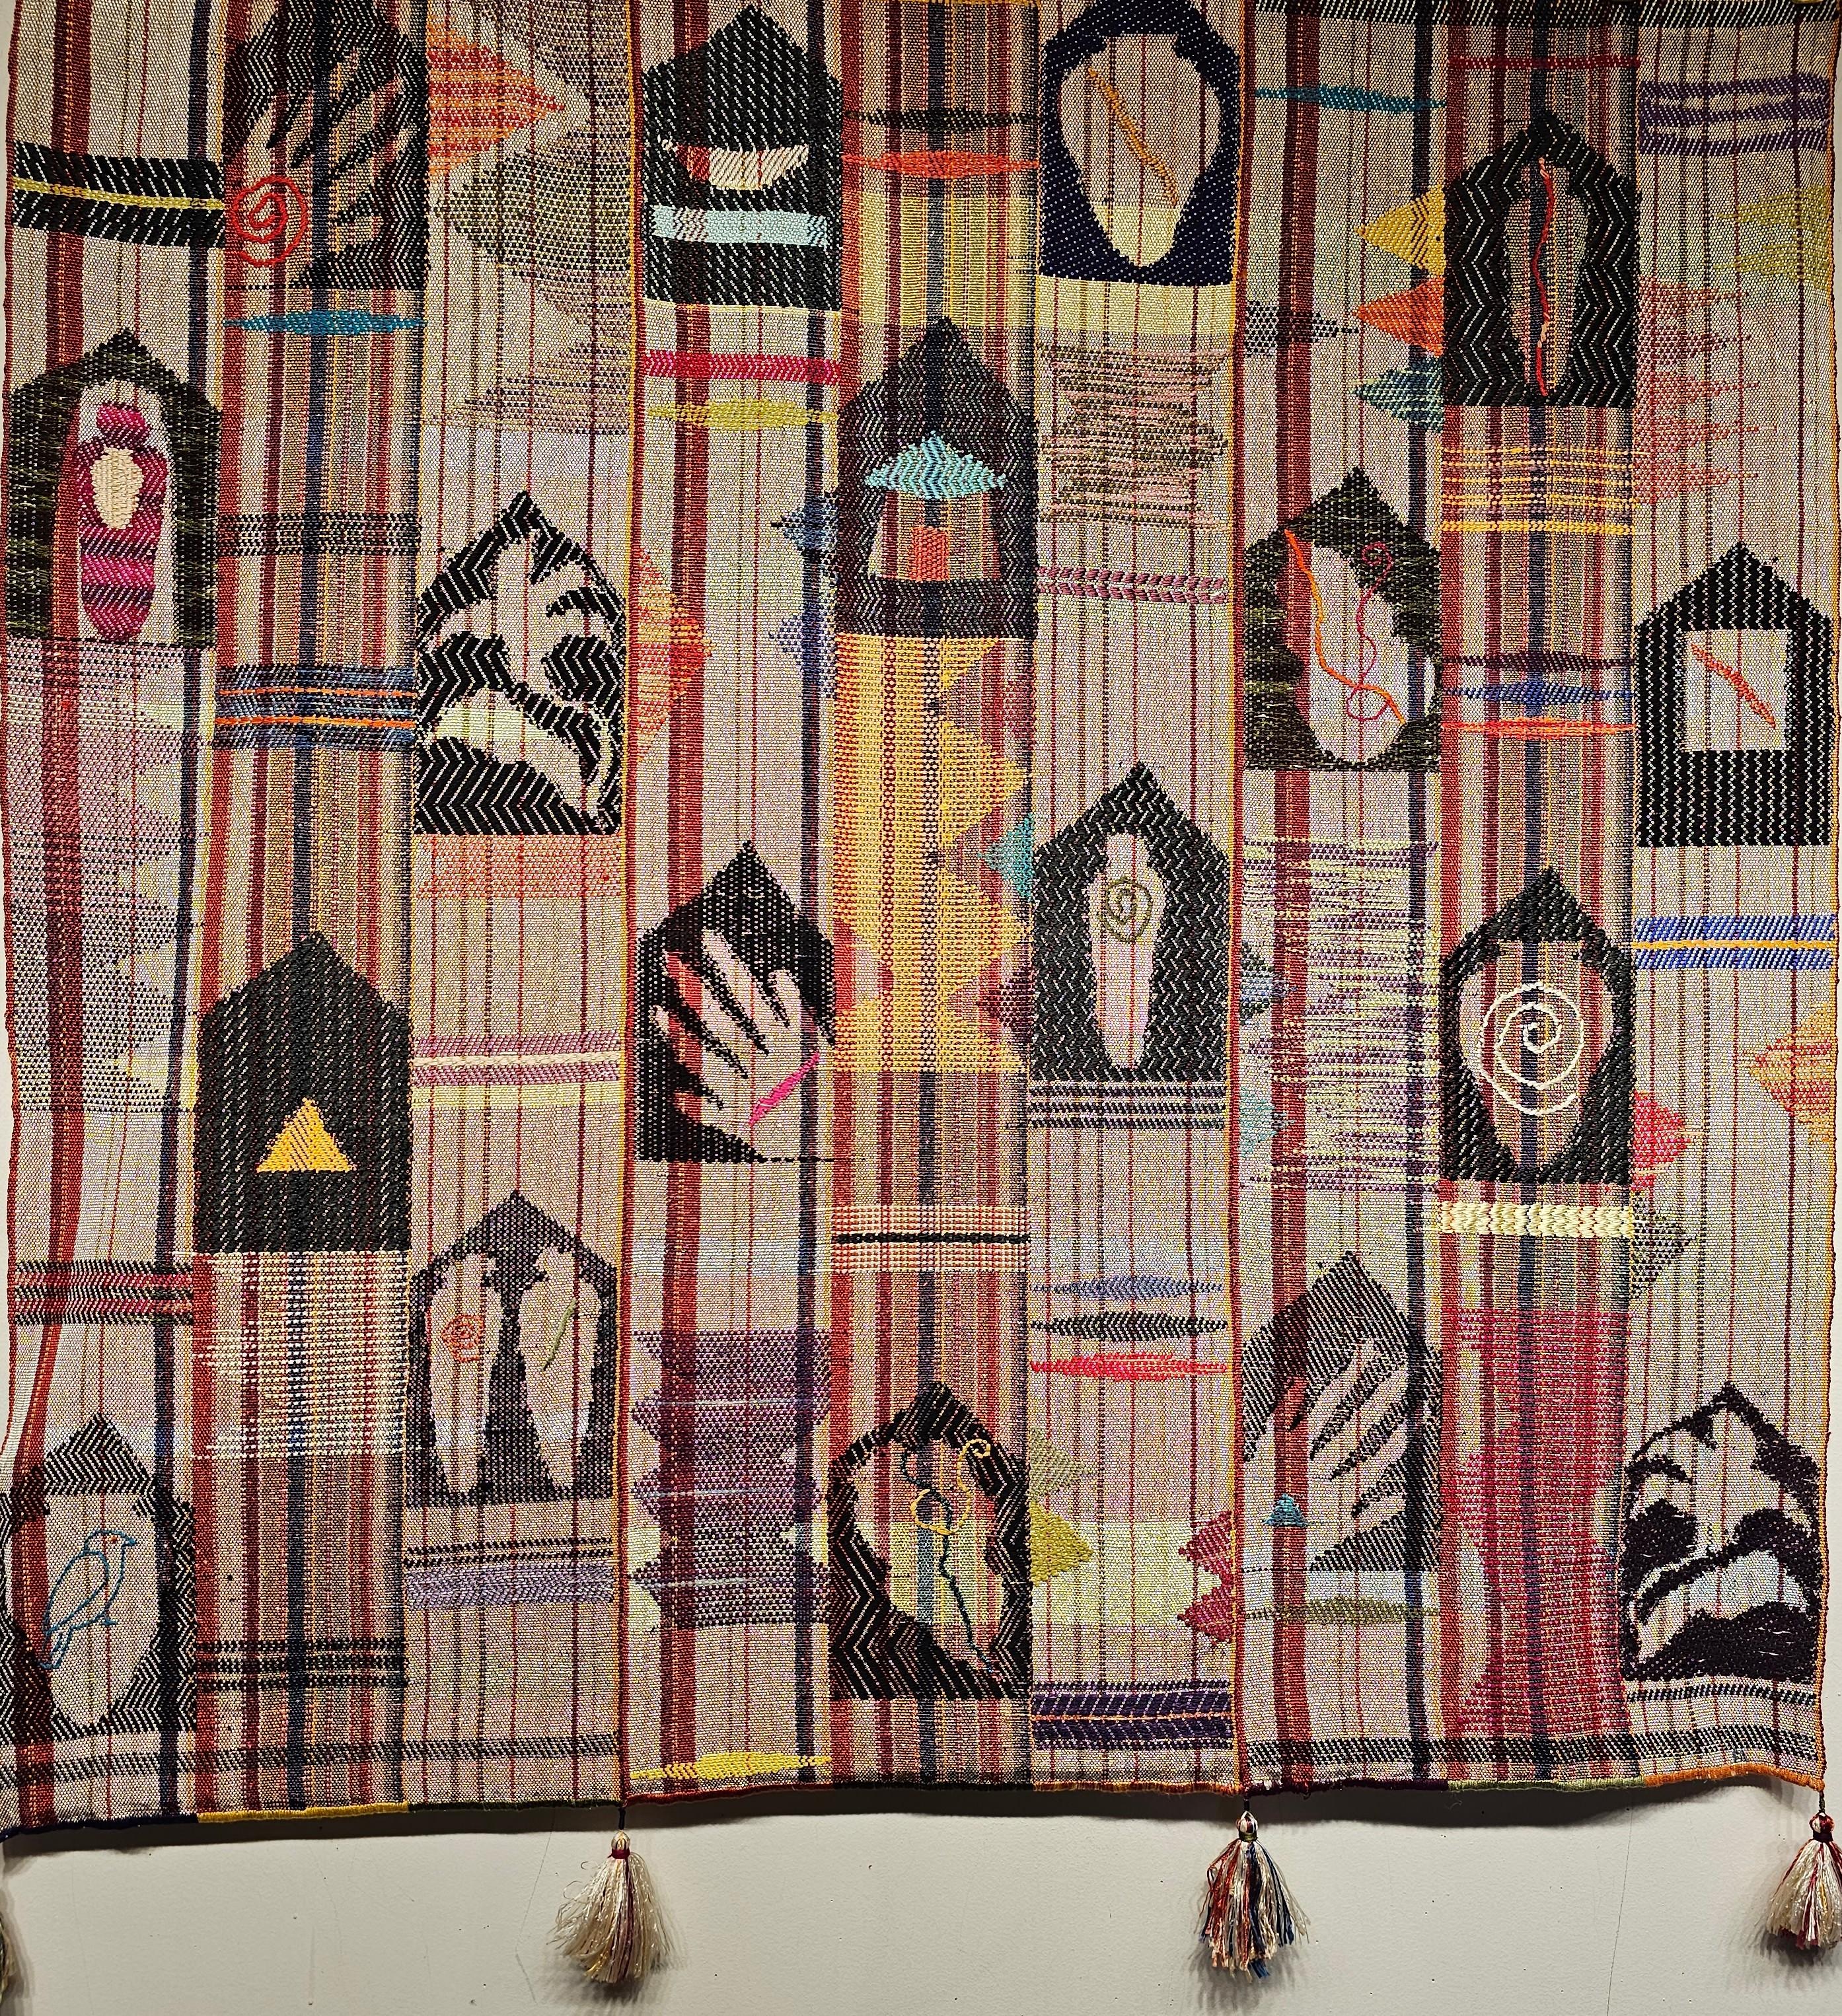 Vintage Modern Design Handwoven Textile Tapestry Wall Art with Figural Forms 2